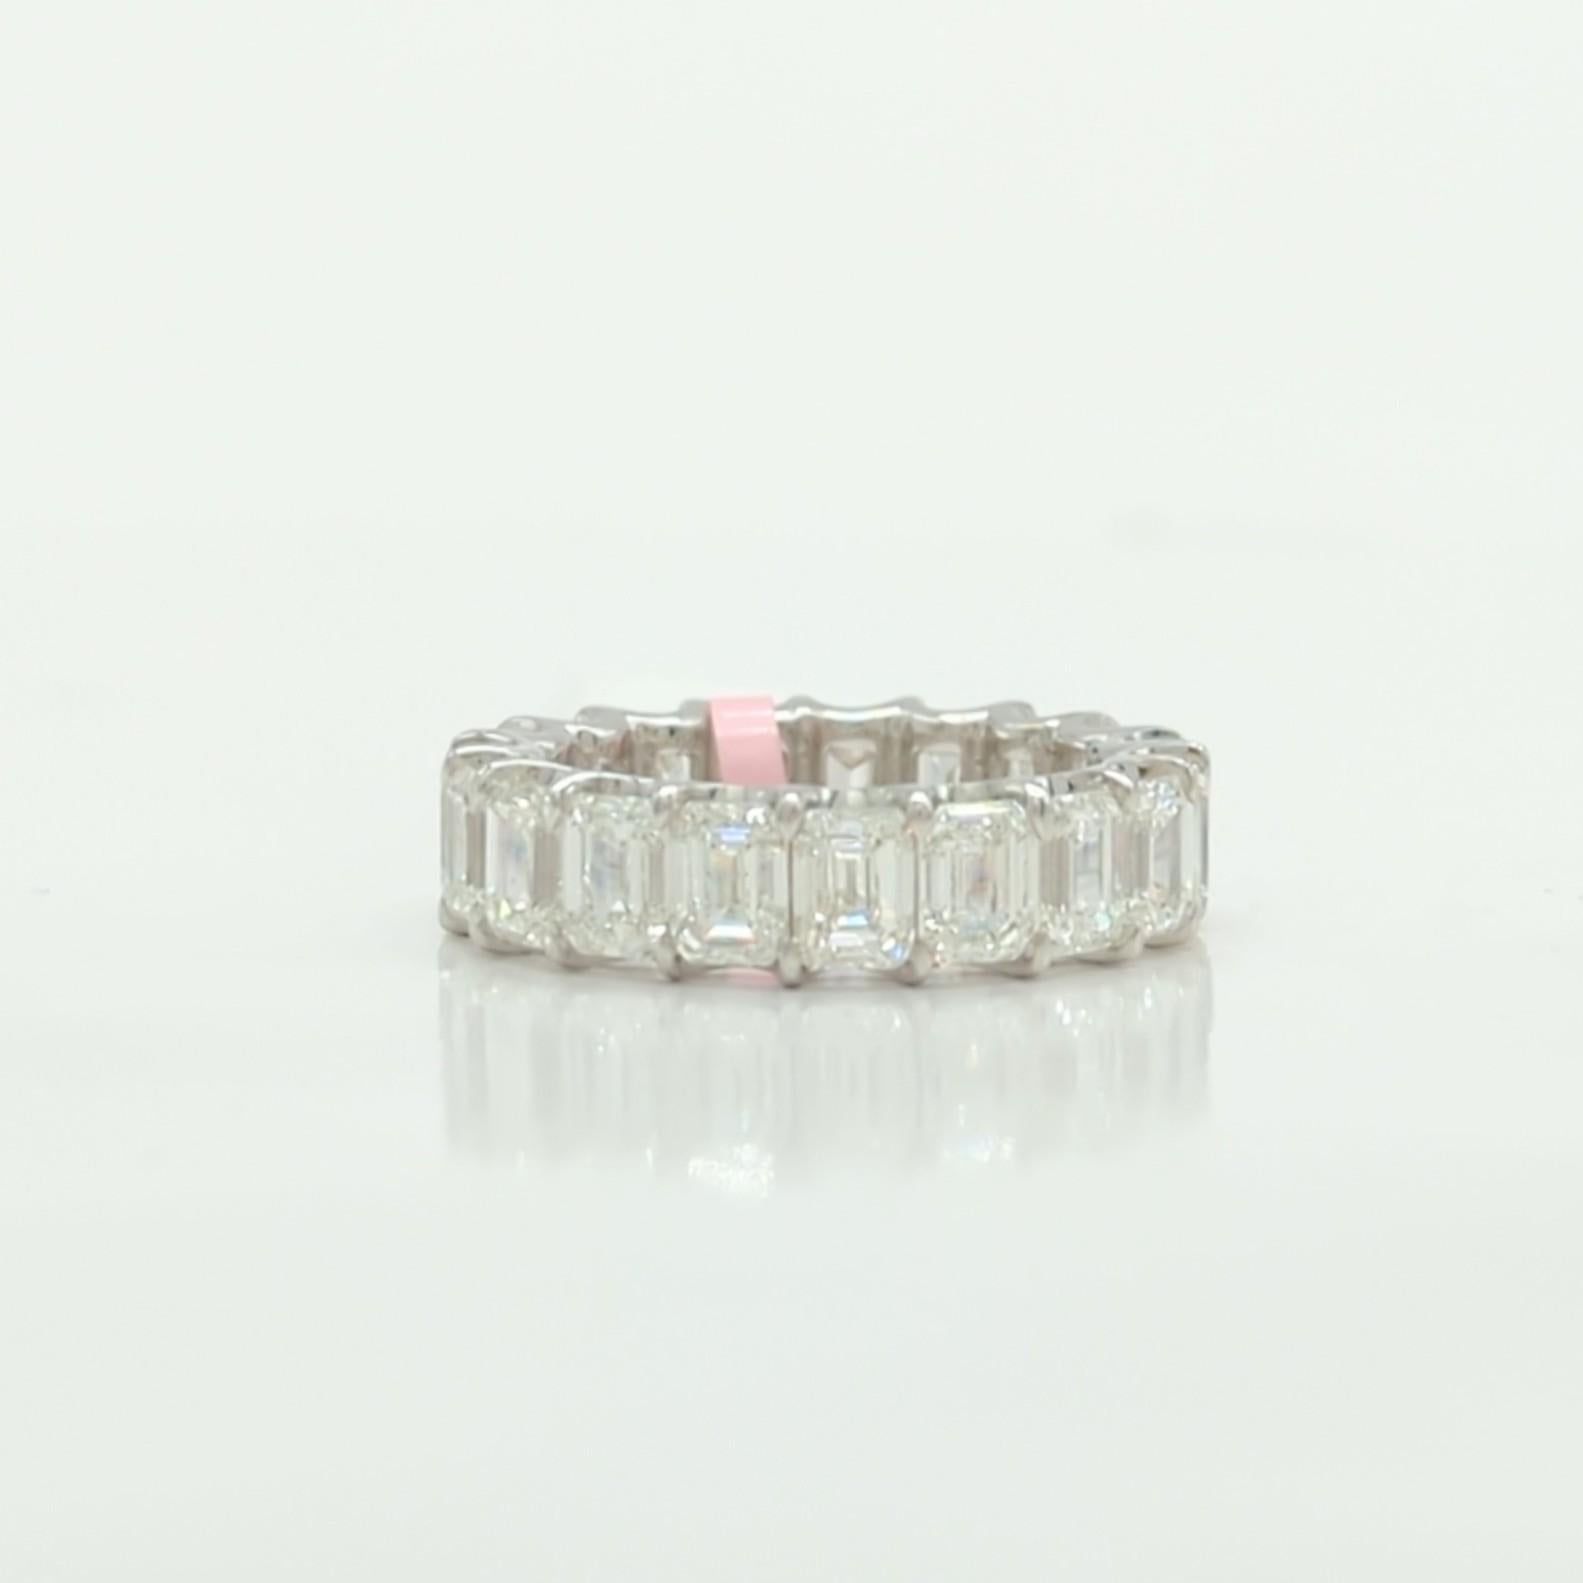 GIA 7 Carat Emerald Cut Diamond Eternity Band Ring in 18K White Gold For Sale 2